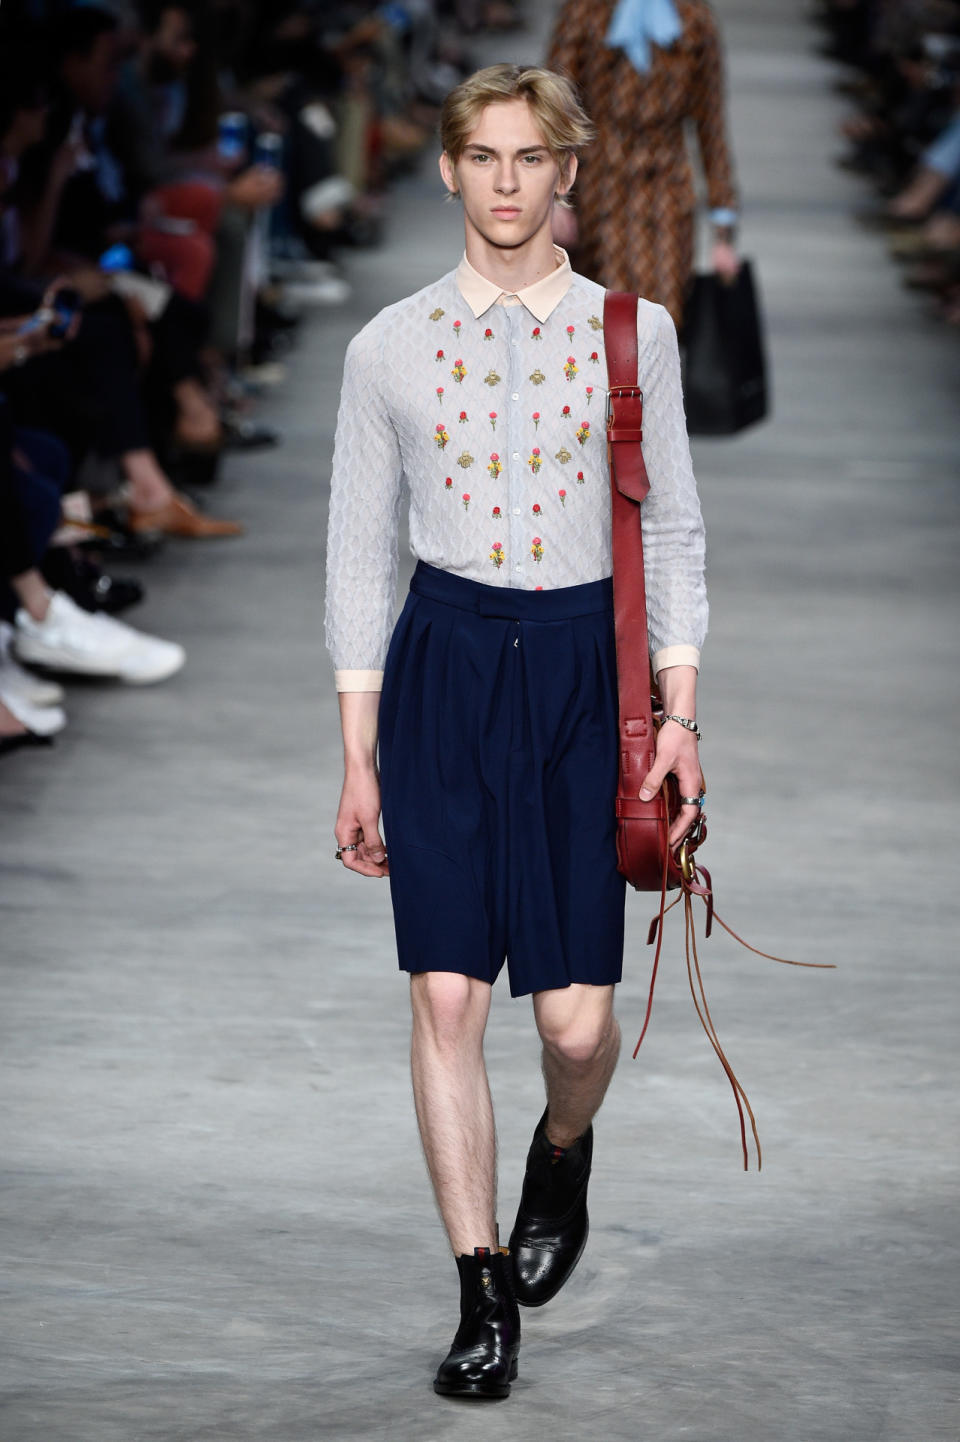 Dude Looks Like a Lady: The Most Gender Fluid Styles From the Men’s Shows